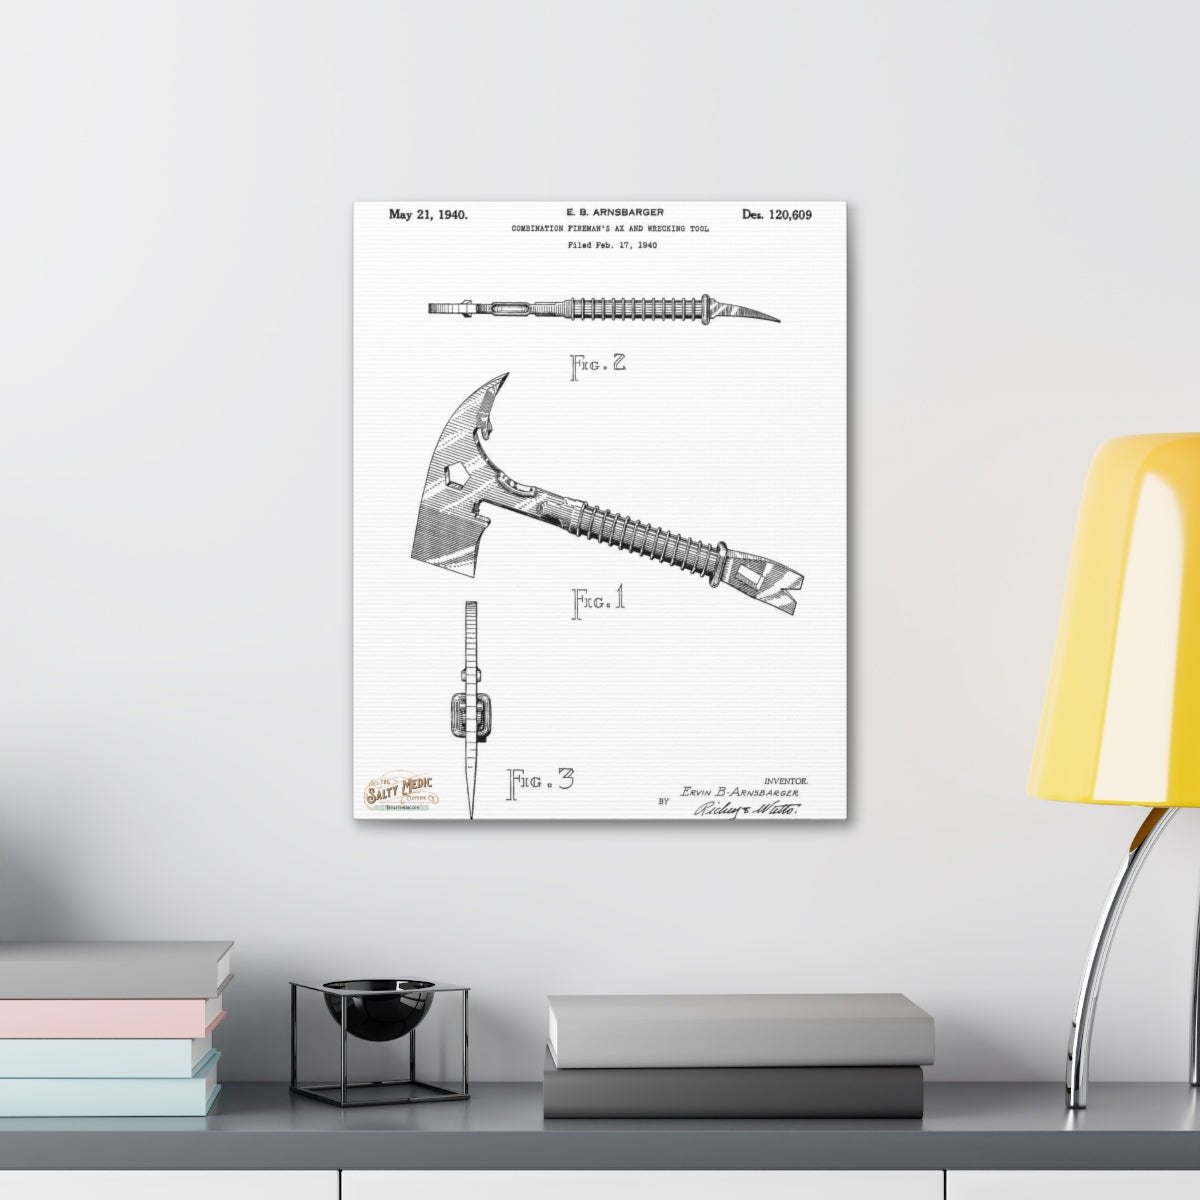 1940 Fireman's Ax & Wrecking Tool Patent Wall Art Stretched Canvas, 1.5'' - Salty Medic Clothing Co.